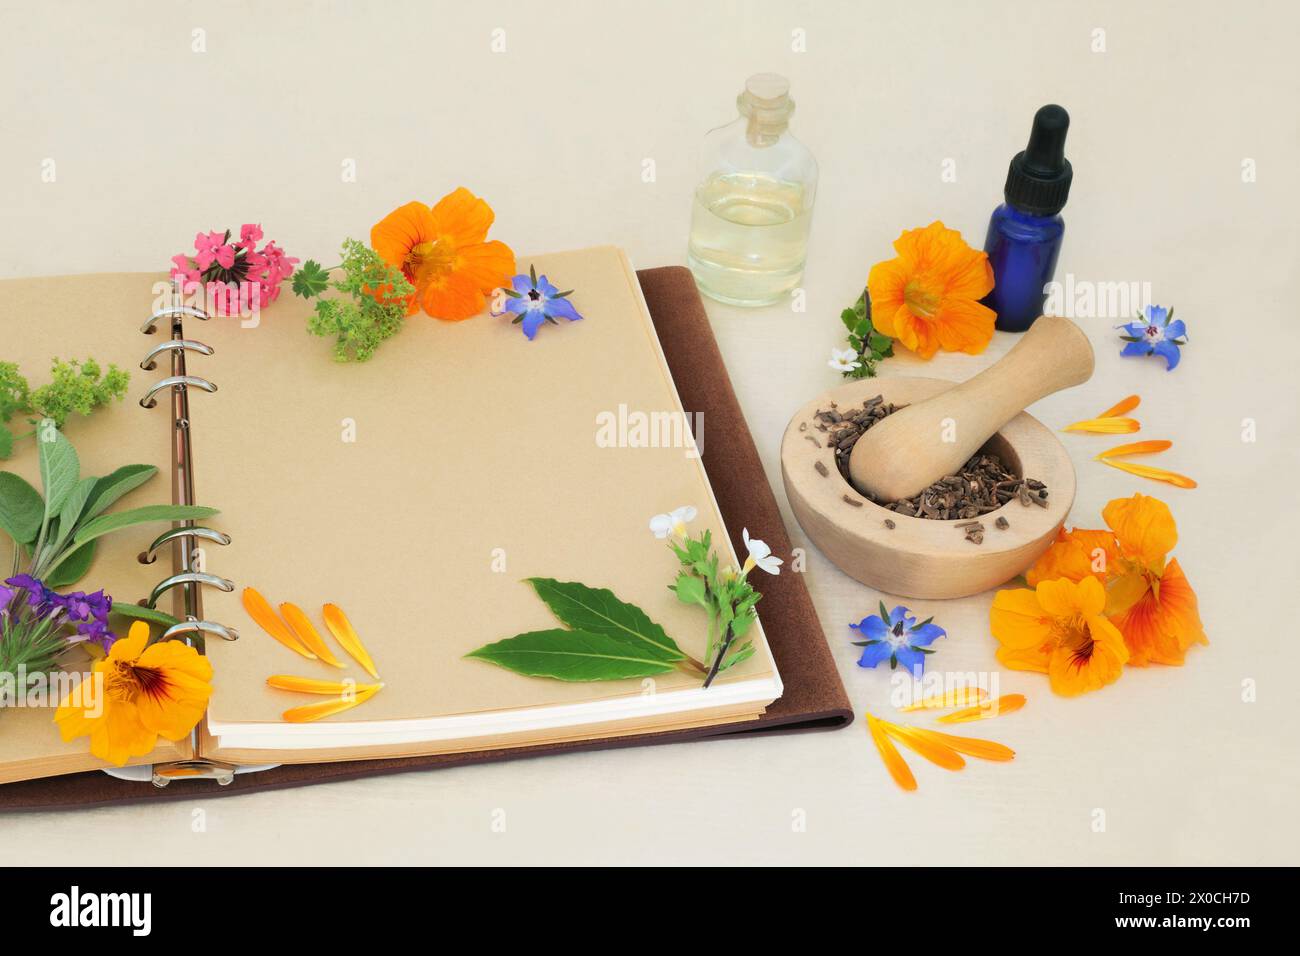 Flowers and herbs for naturopathic, medicinal and aromatherapy treatments. Herbal medicine ingredients for alternative remedies with recipe notebook. Stock Photo